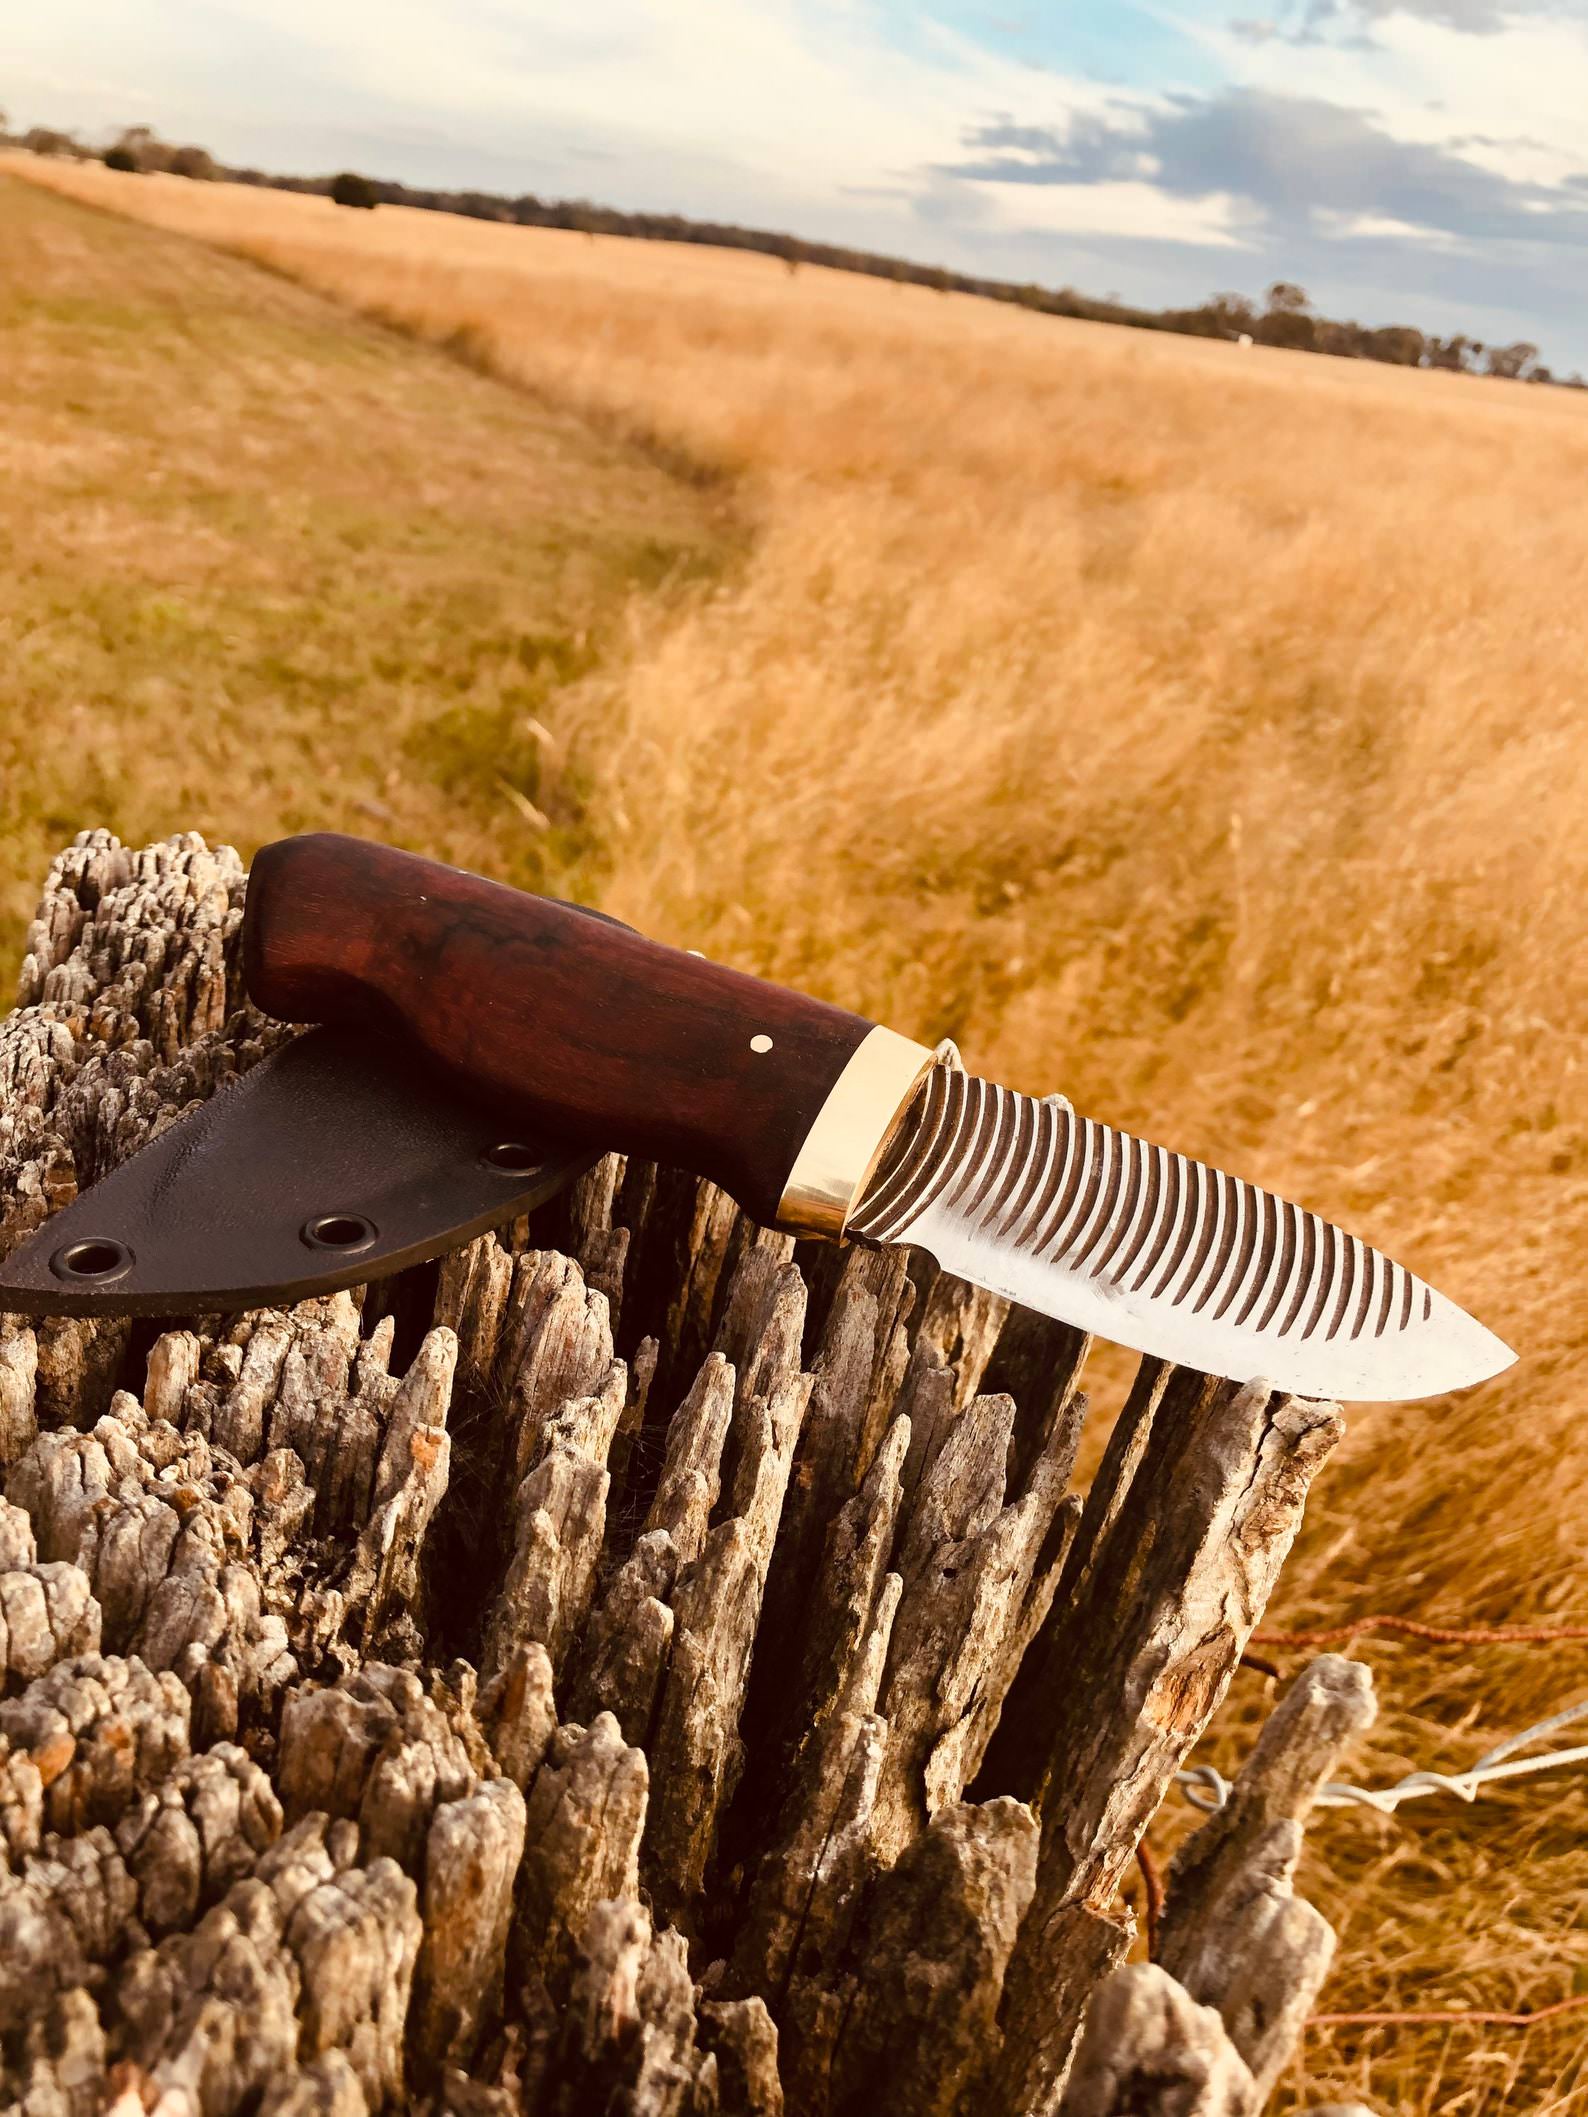 https://silodrome.com/wp-content/uploads/2022/05/Hand-Forged-File-Knife-By-Rustic-Road-Australia-3.jpg